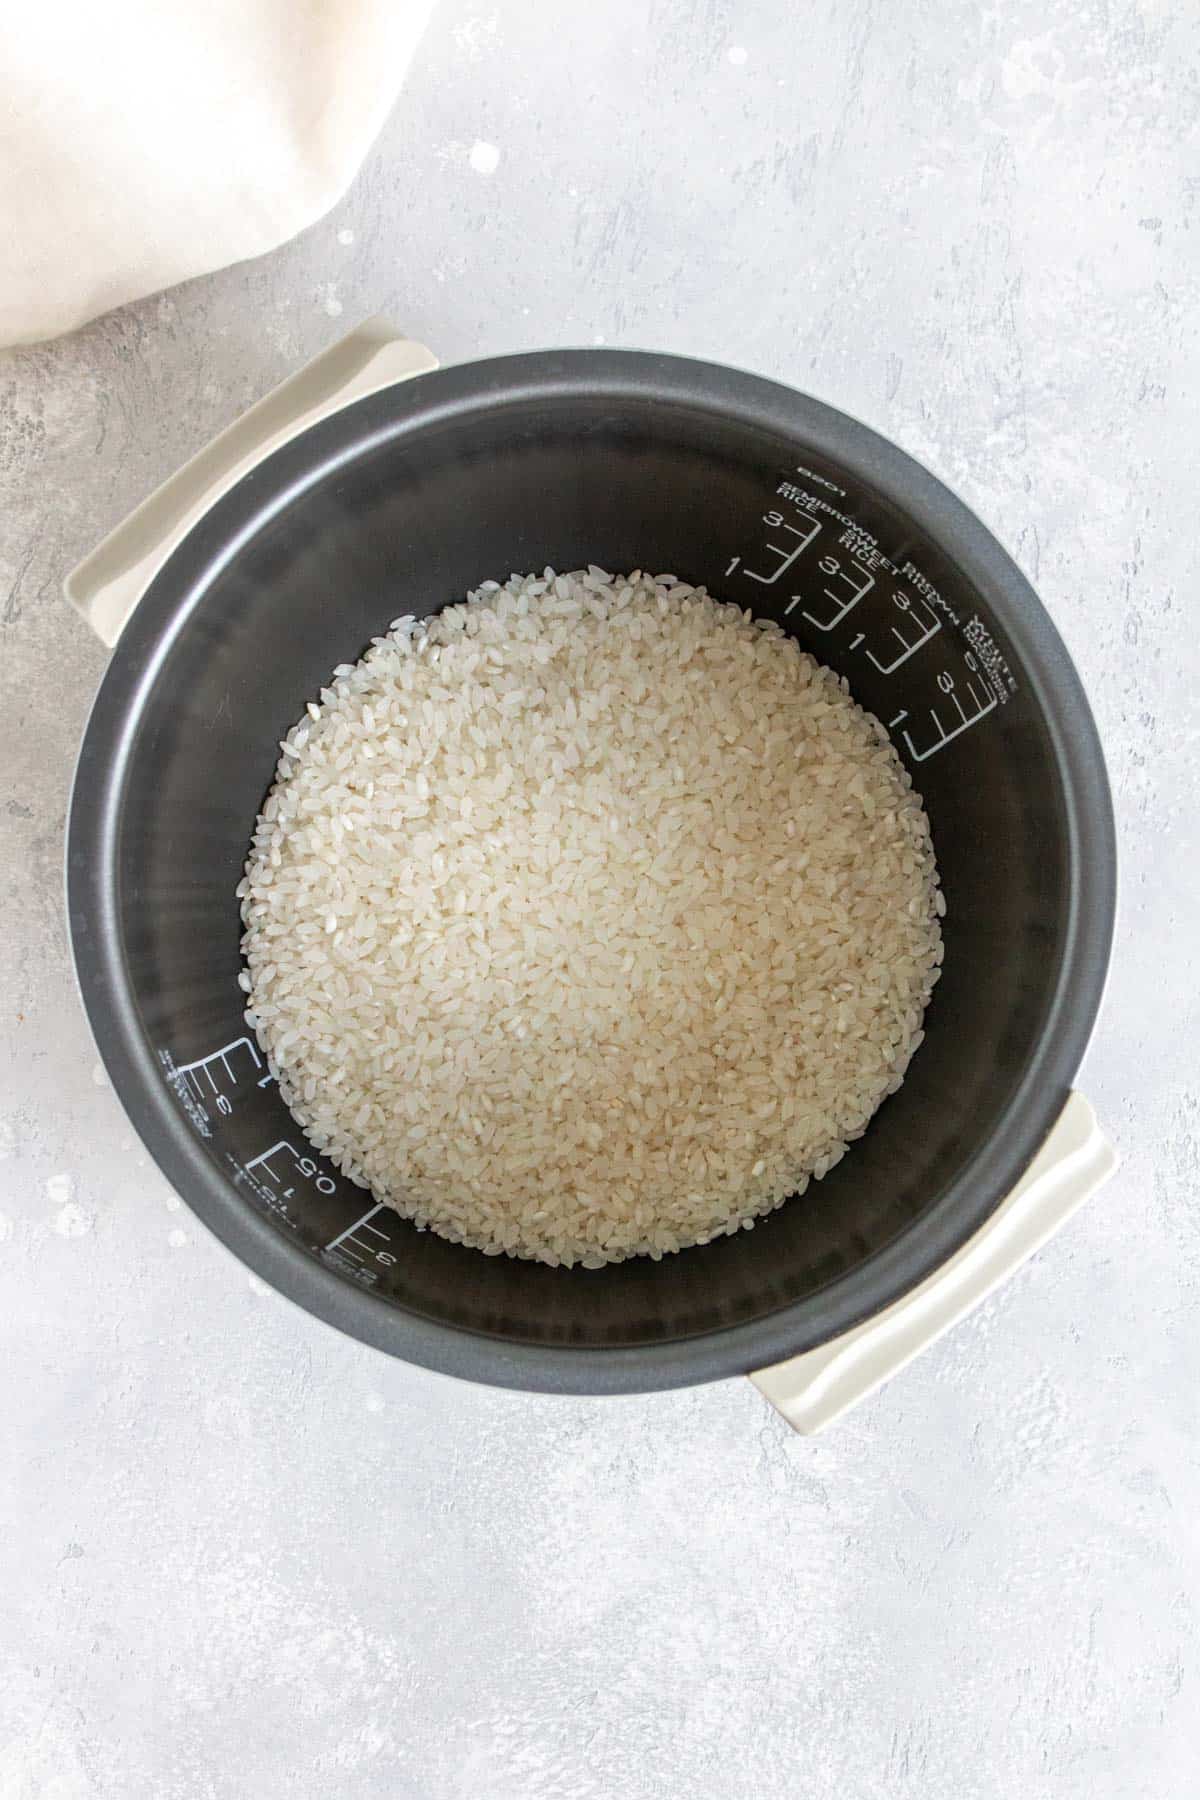 Rice in a rice cooker.